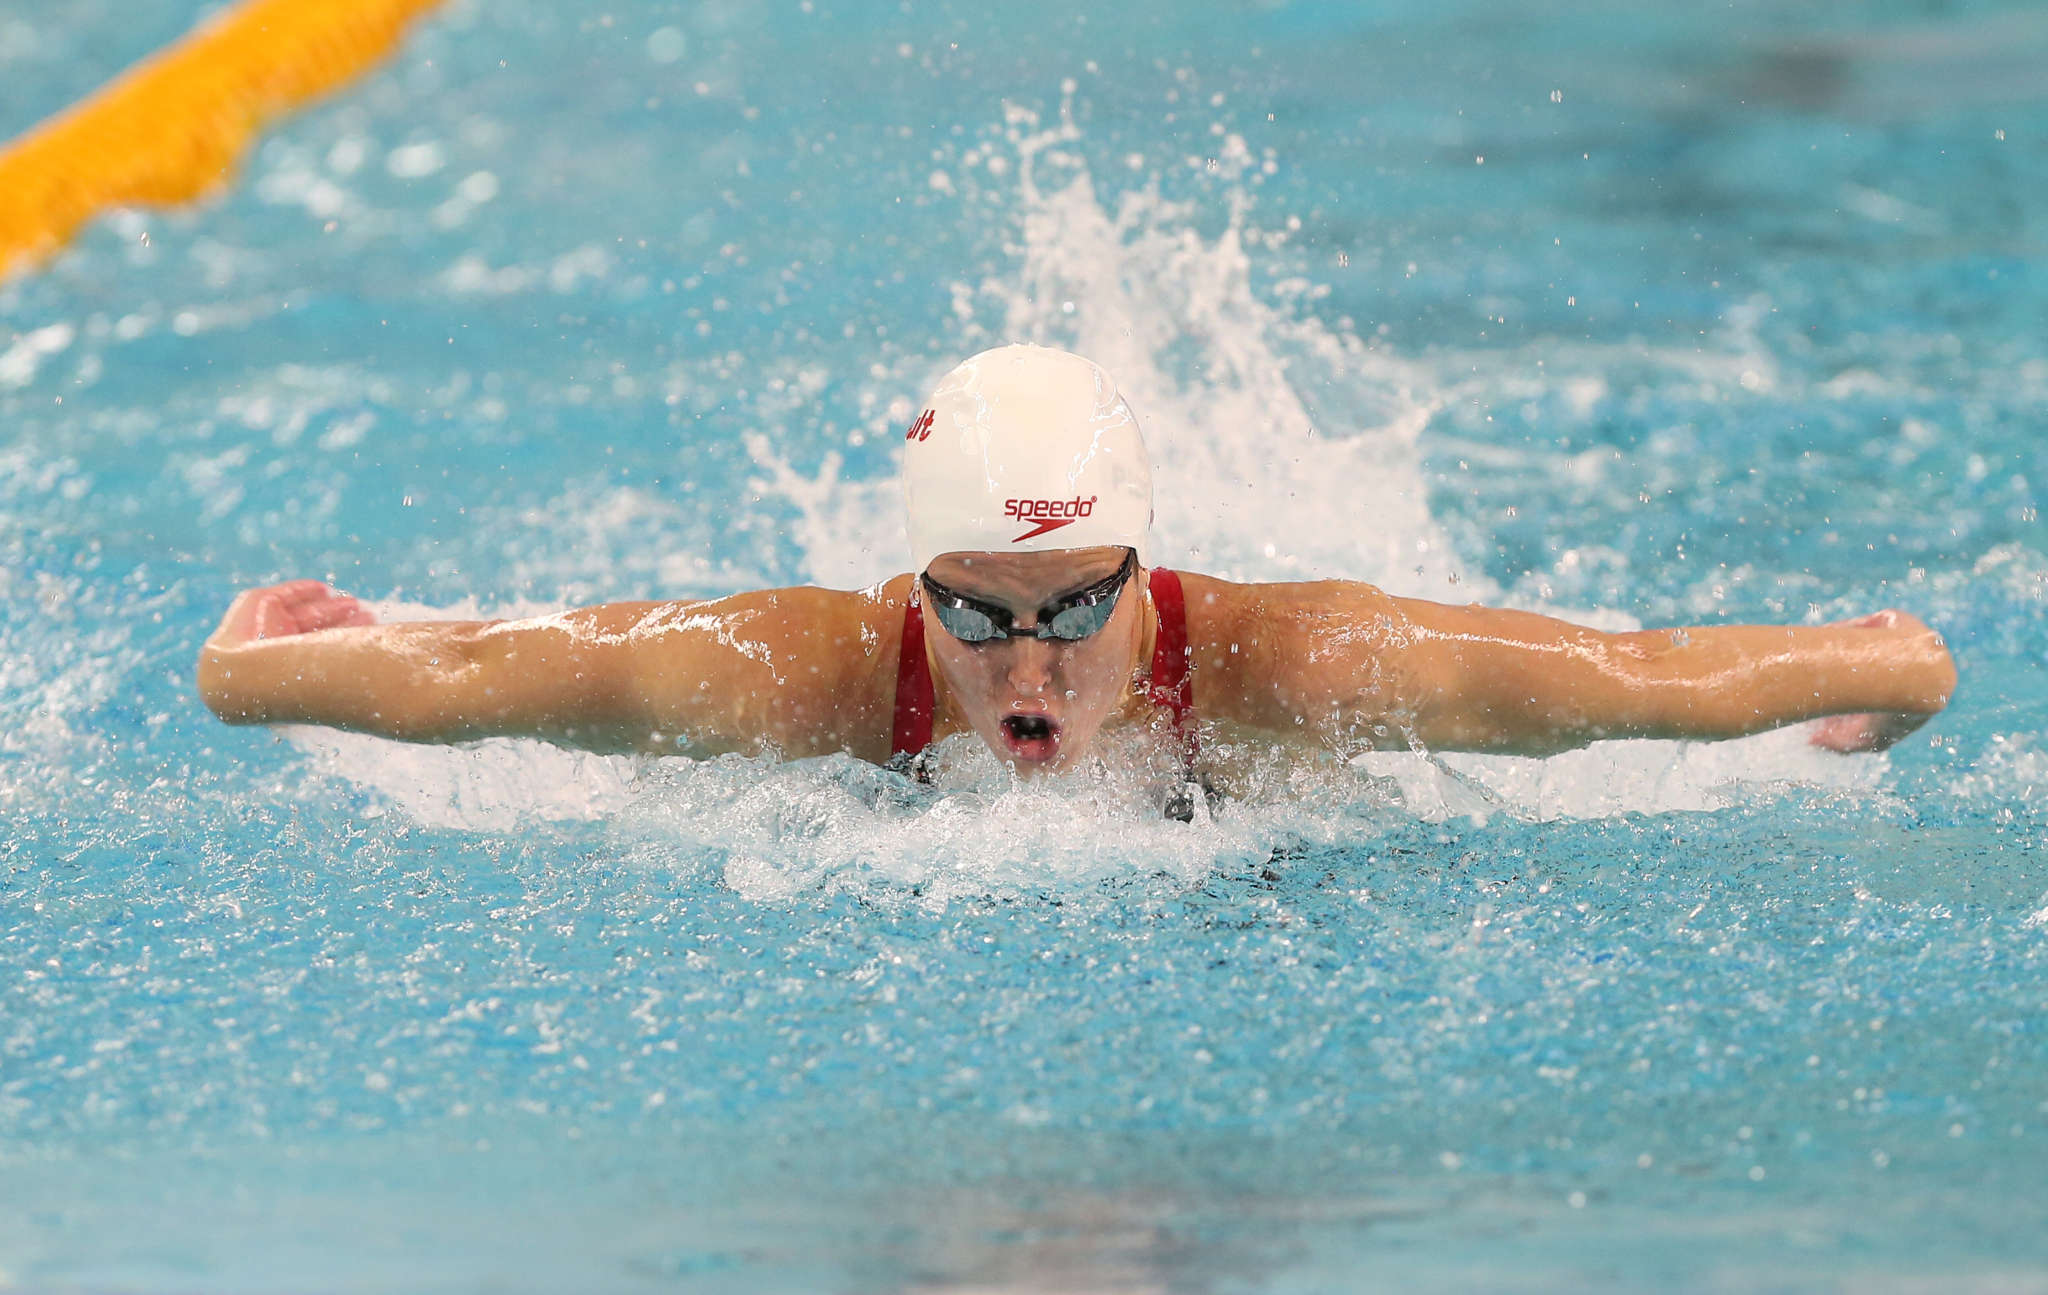 Sydney Pickrem comes back to win 200 IM at Canadian Swimming Trials